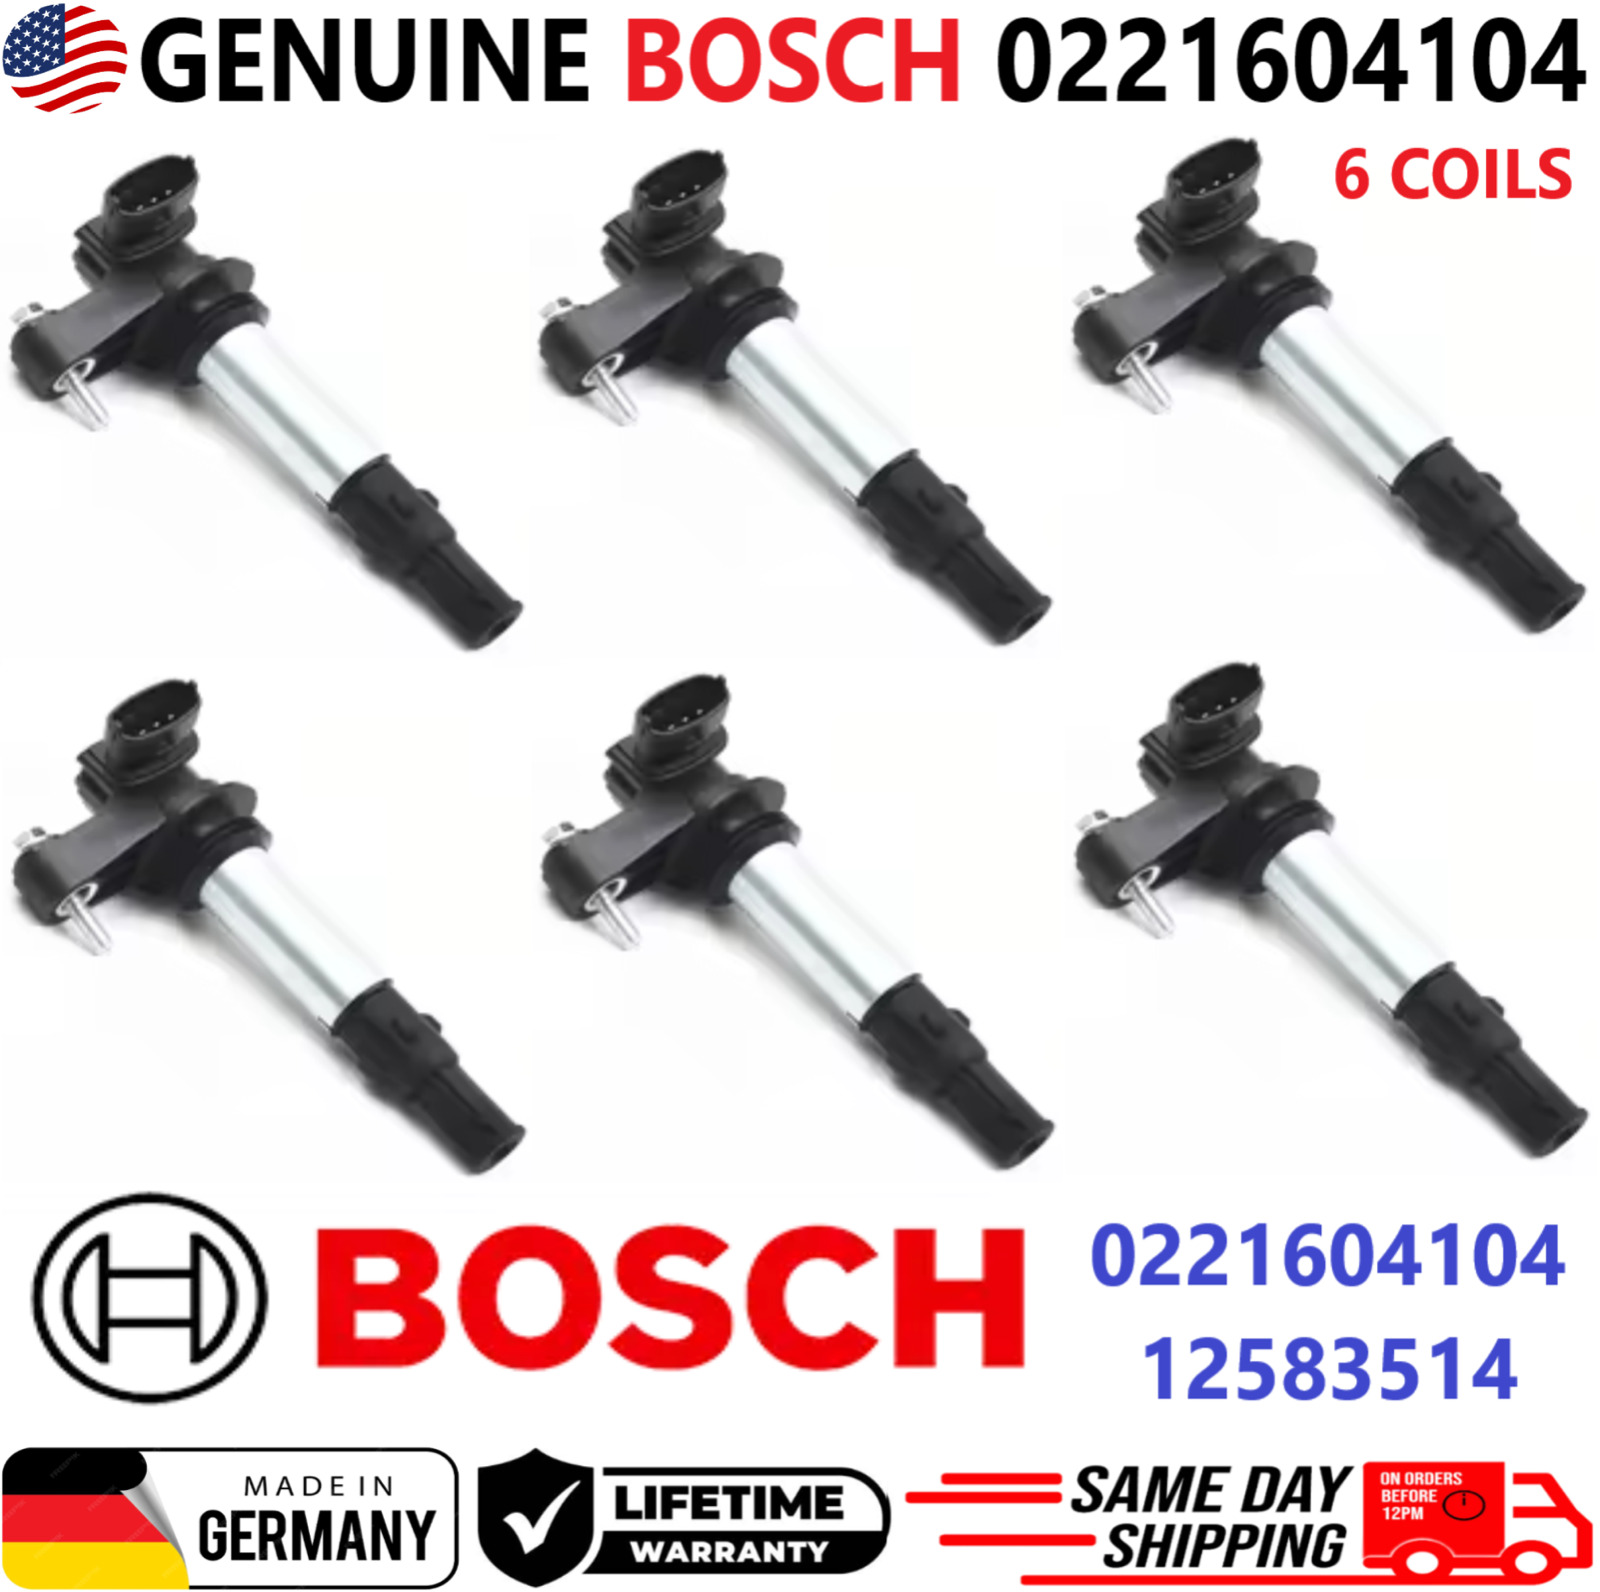 GENUINE BOSCH x6 Ignition Coils For 2004-2009 Cadillac Saab Buick V6, 0221604104